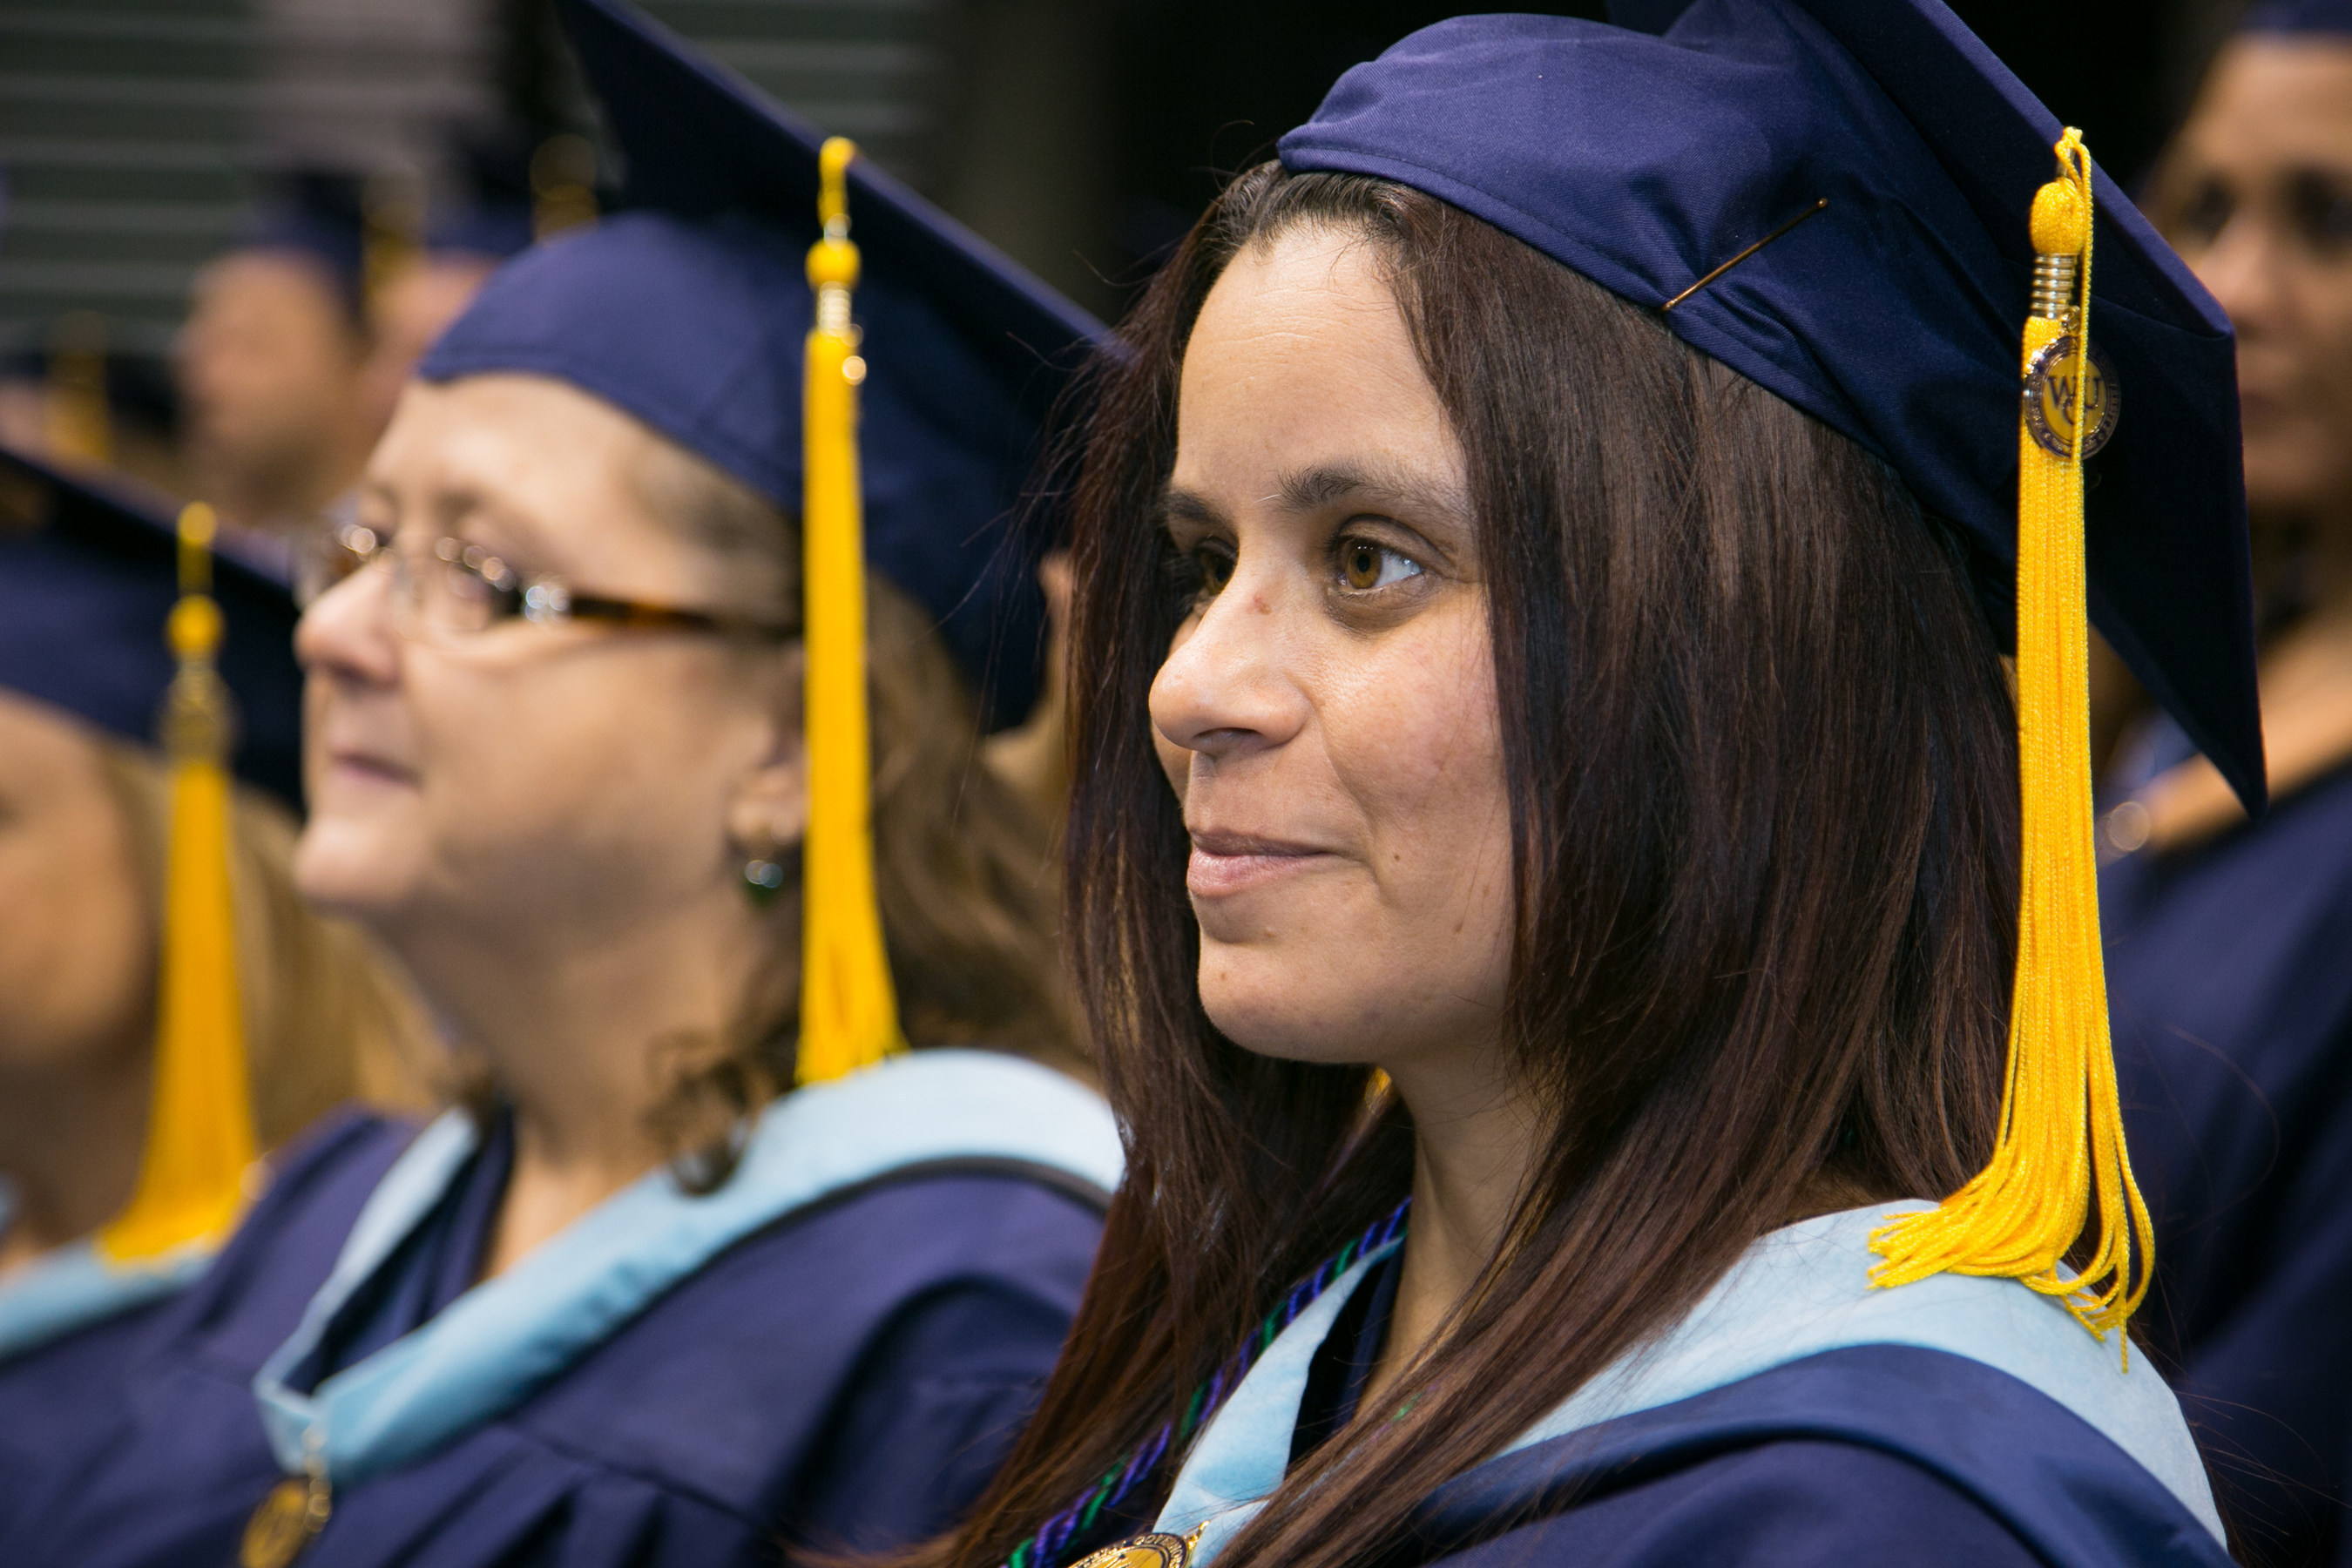 WGU offers flexible degree programs in high-demand fields designed for busy working adults.